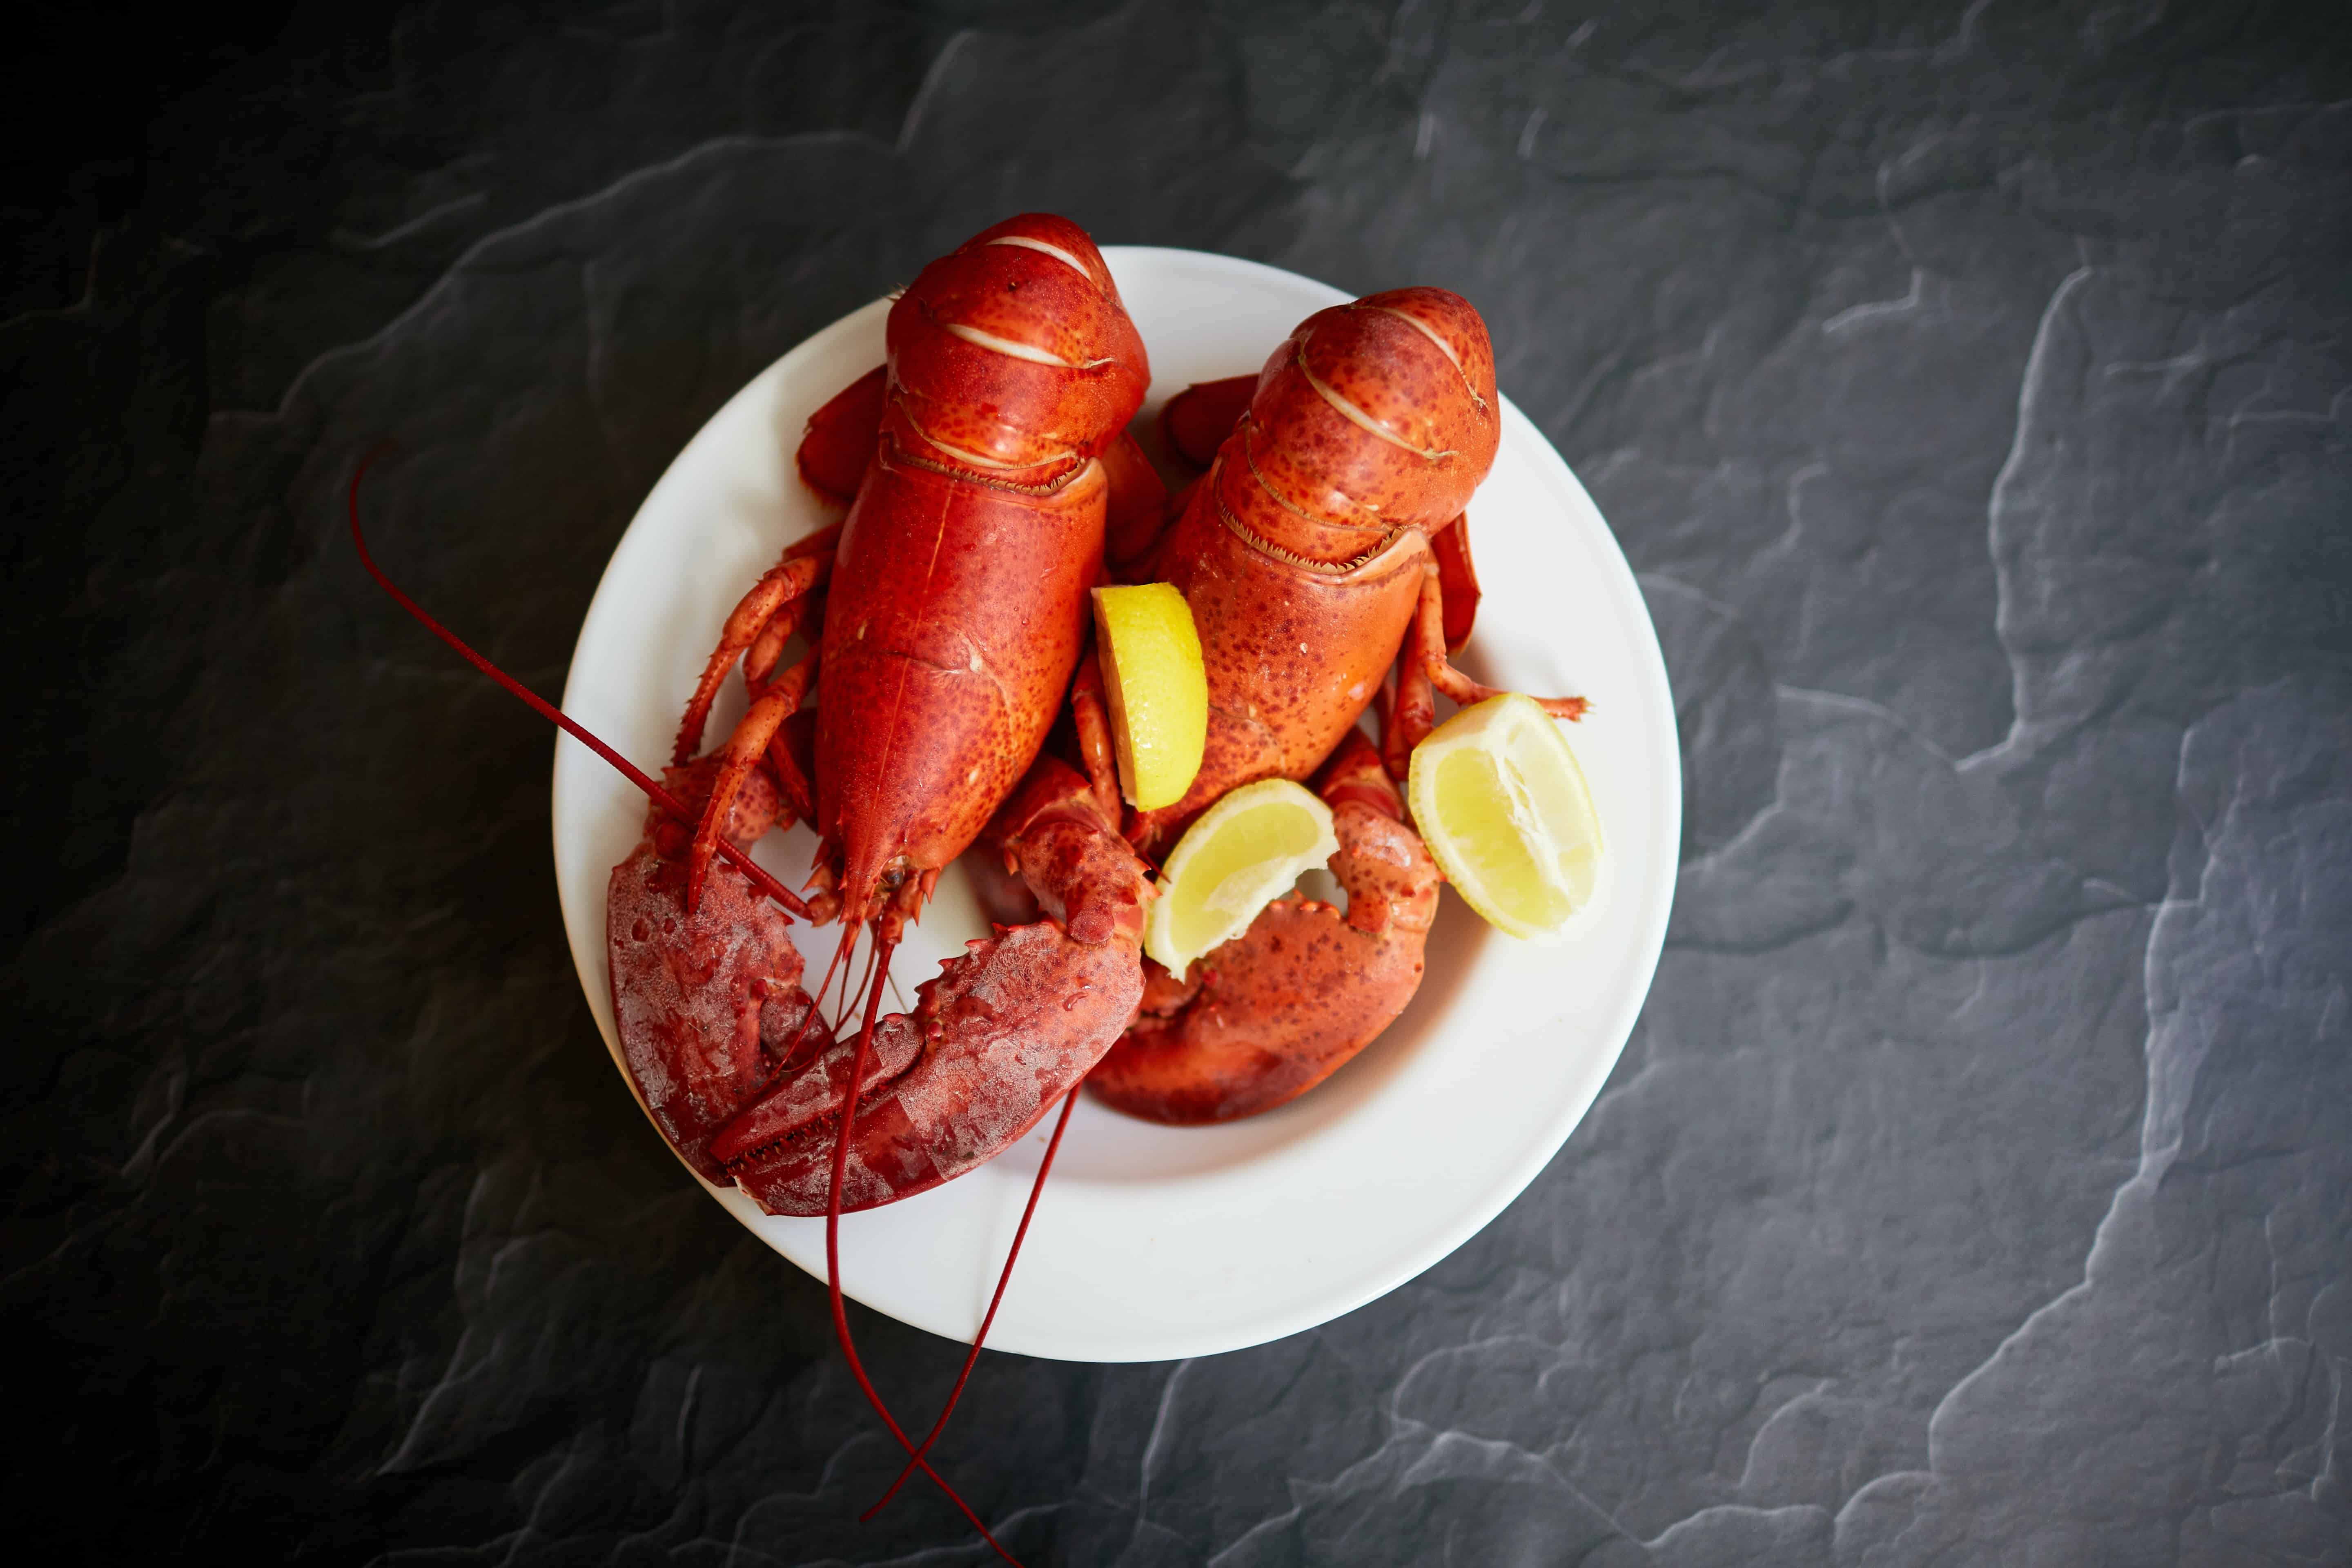 Is It Cruel to Boil a Live Lobster? (Includes Humane Alternatives)